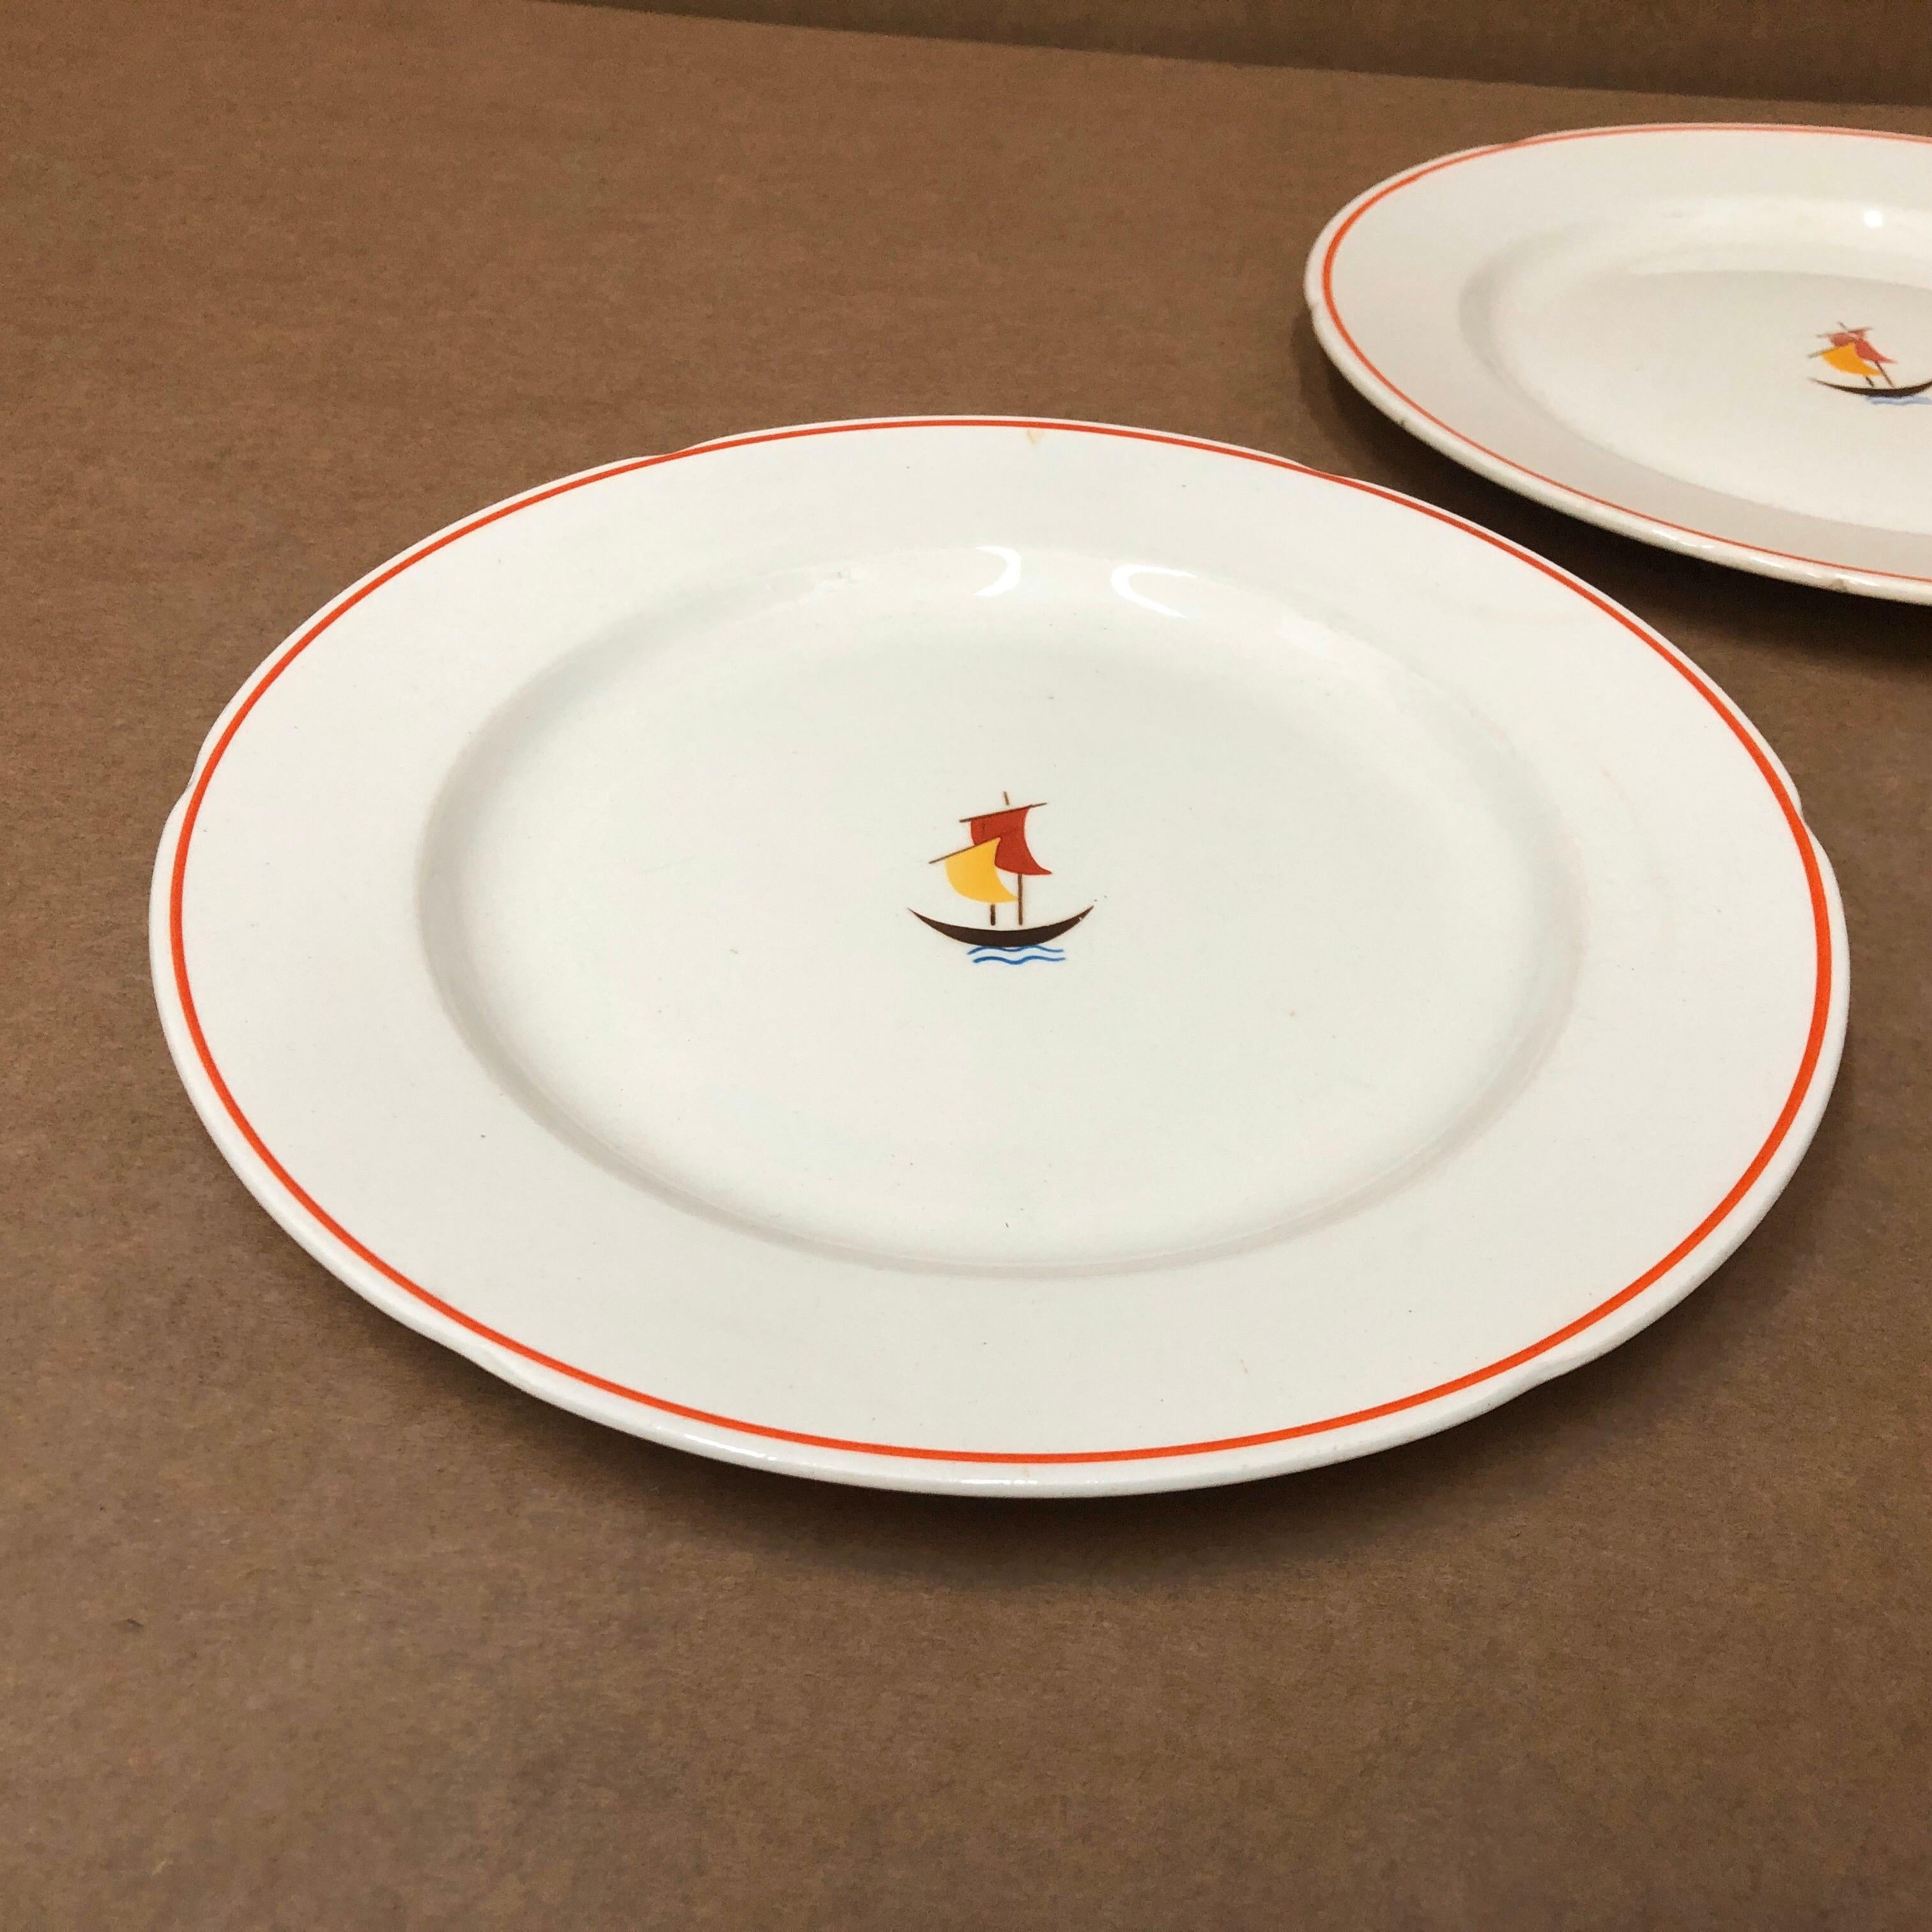 Two plates designed by Gio Ponti, made in Italy in the 1930s, good conditions overall.